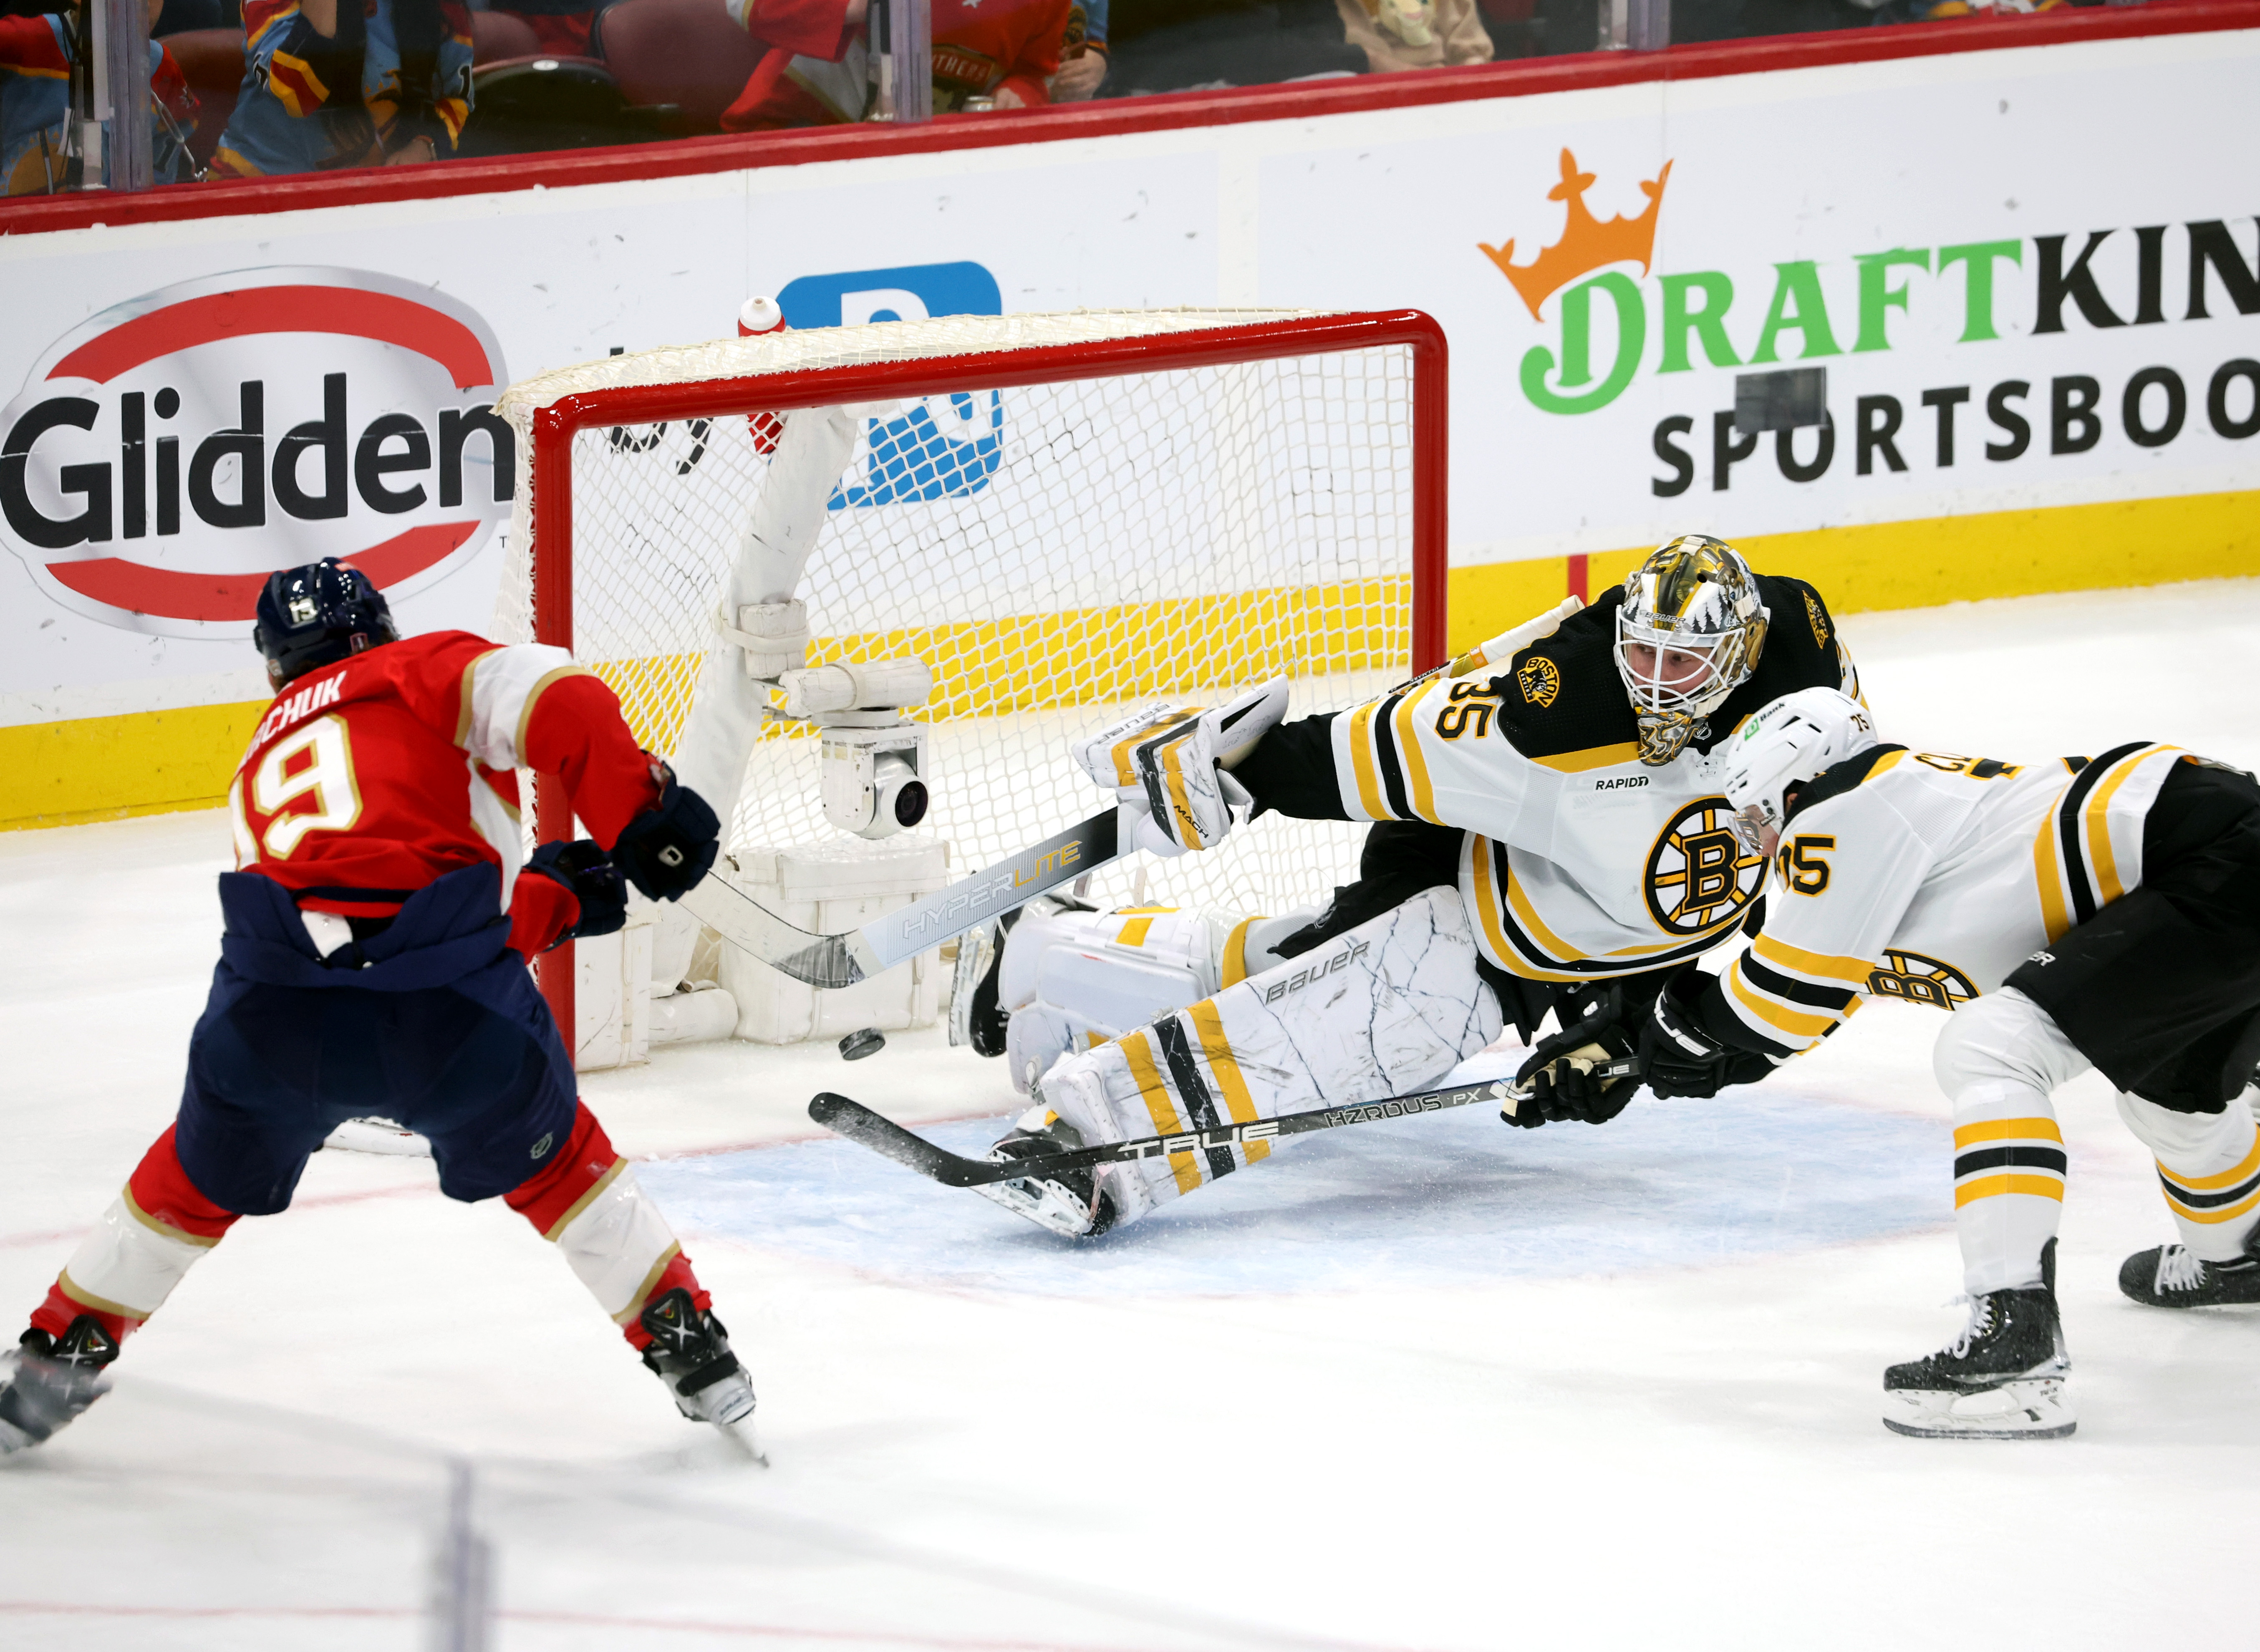 3 takeaways from the Bruins' win over the Rangers